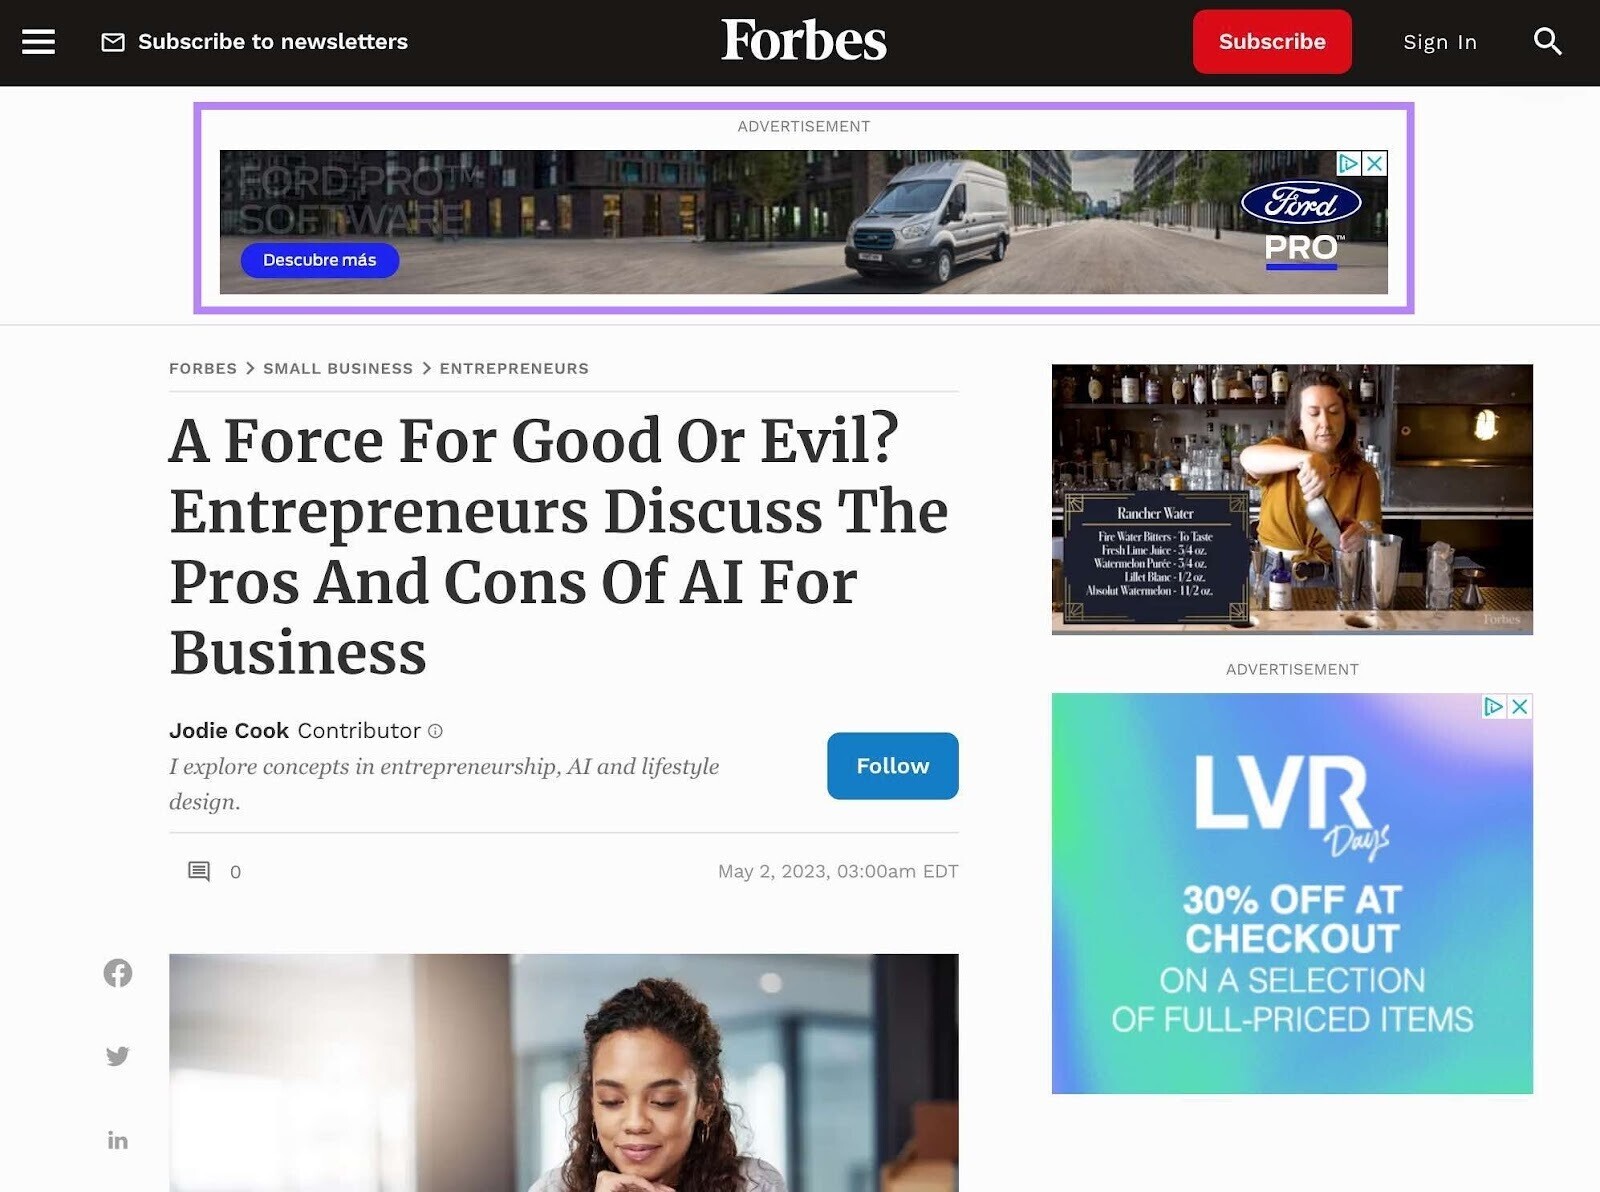 Banner ad for Ford in Forbes article